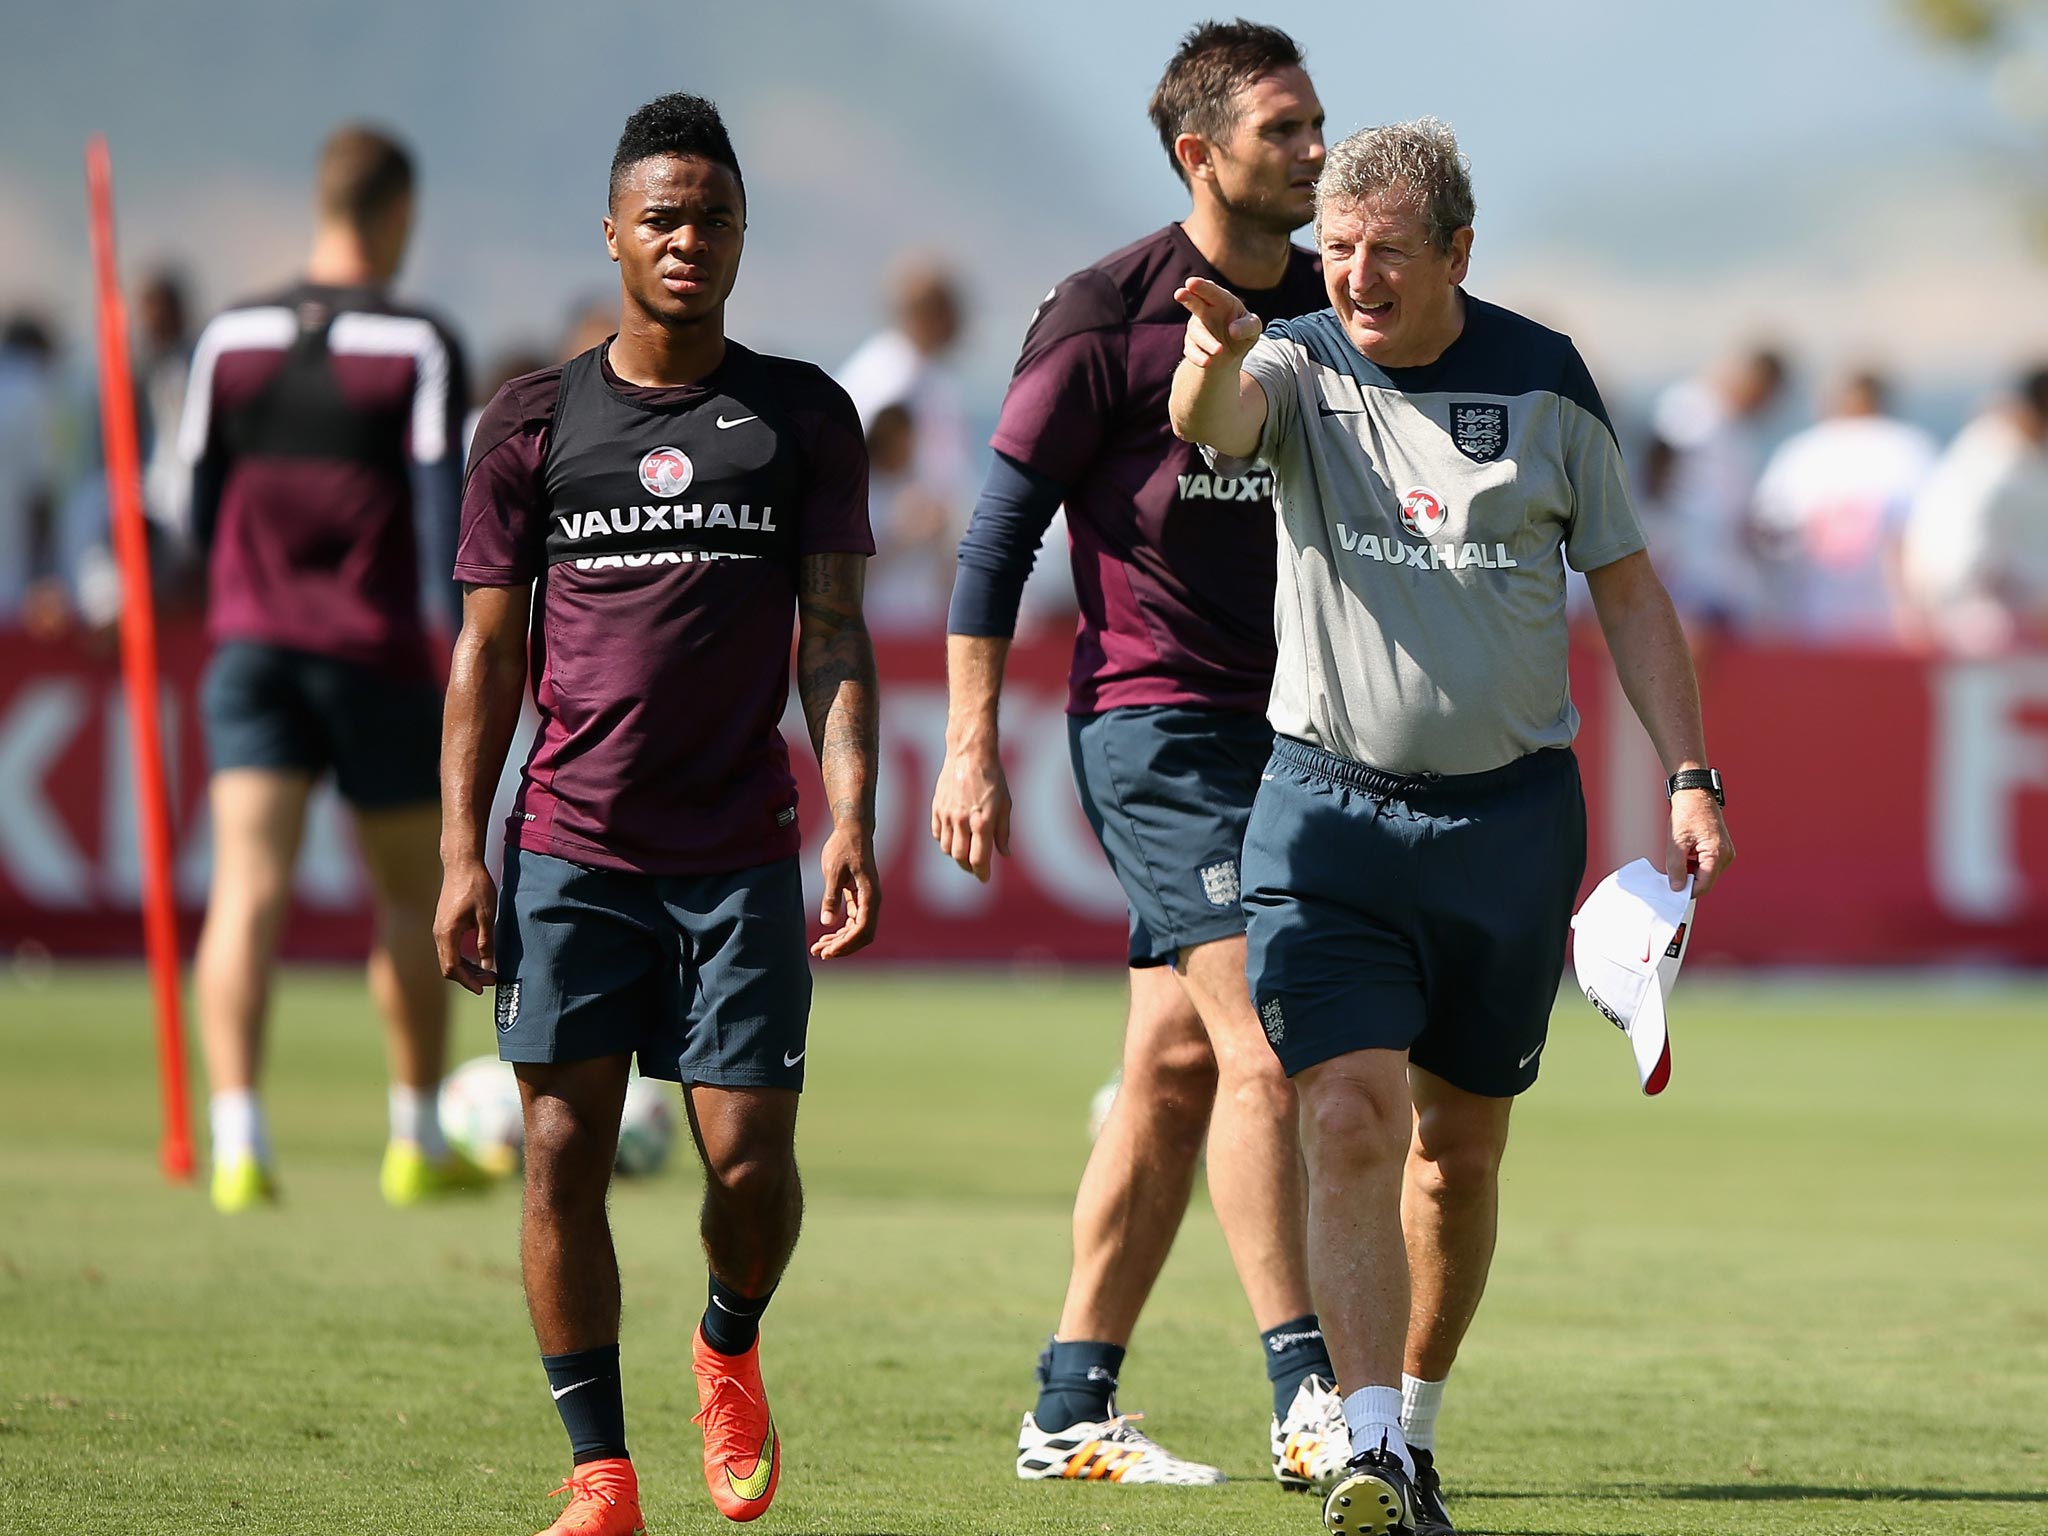 The England manager, Roy Hodgson, sounded a note of caution on whether to throw the likes of Raheem Sterling (left) into the fray too early